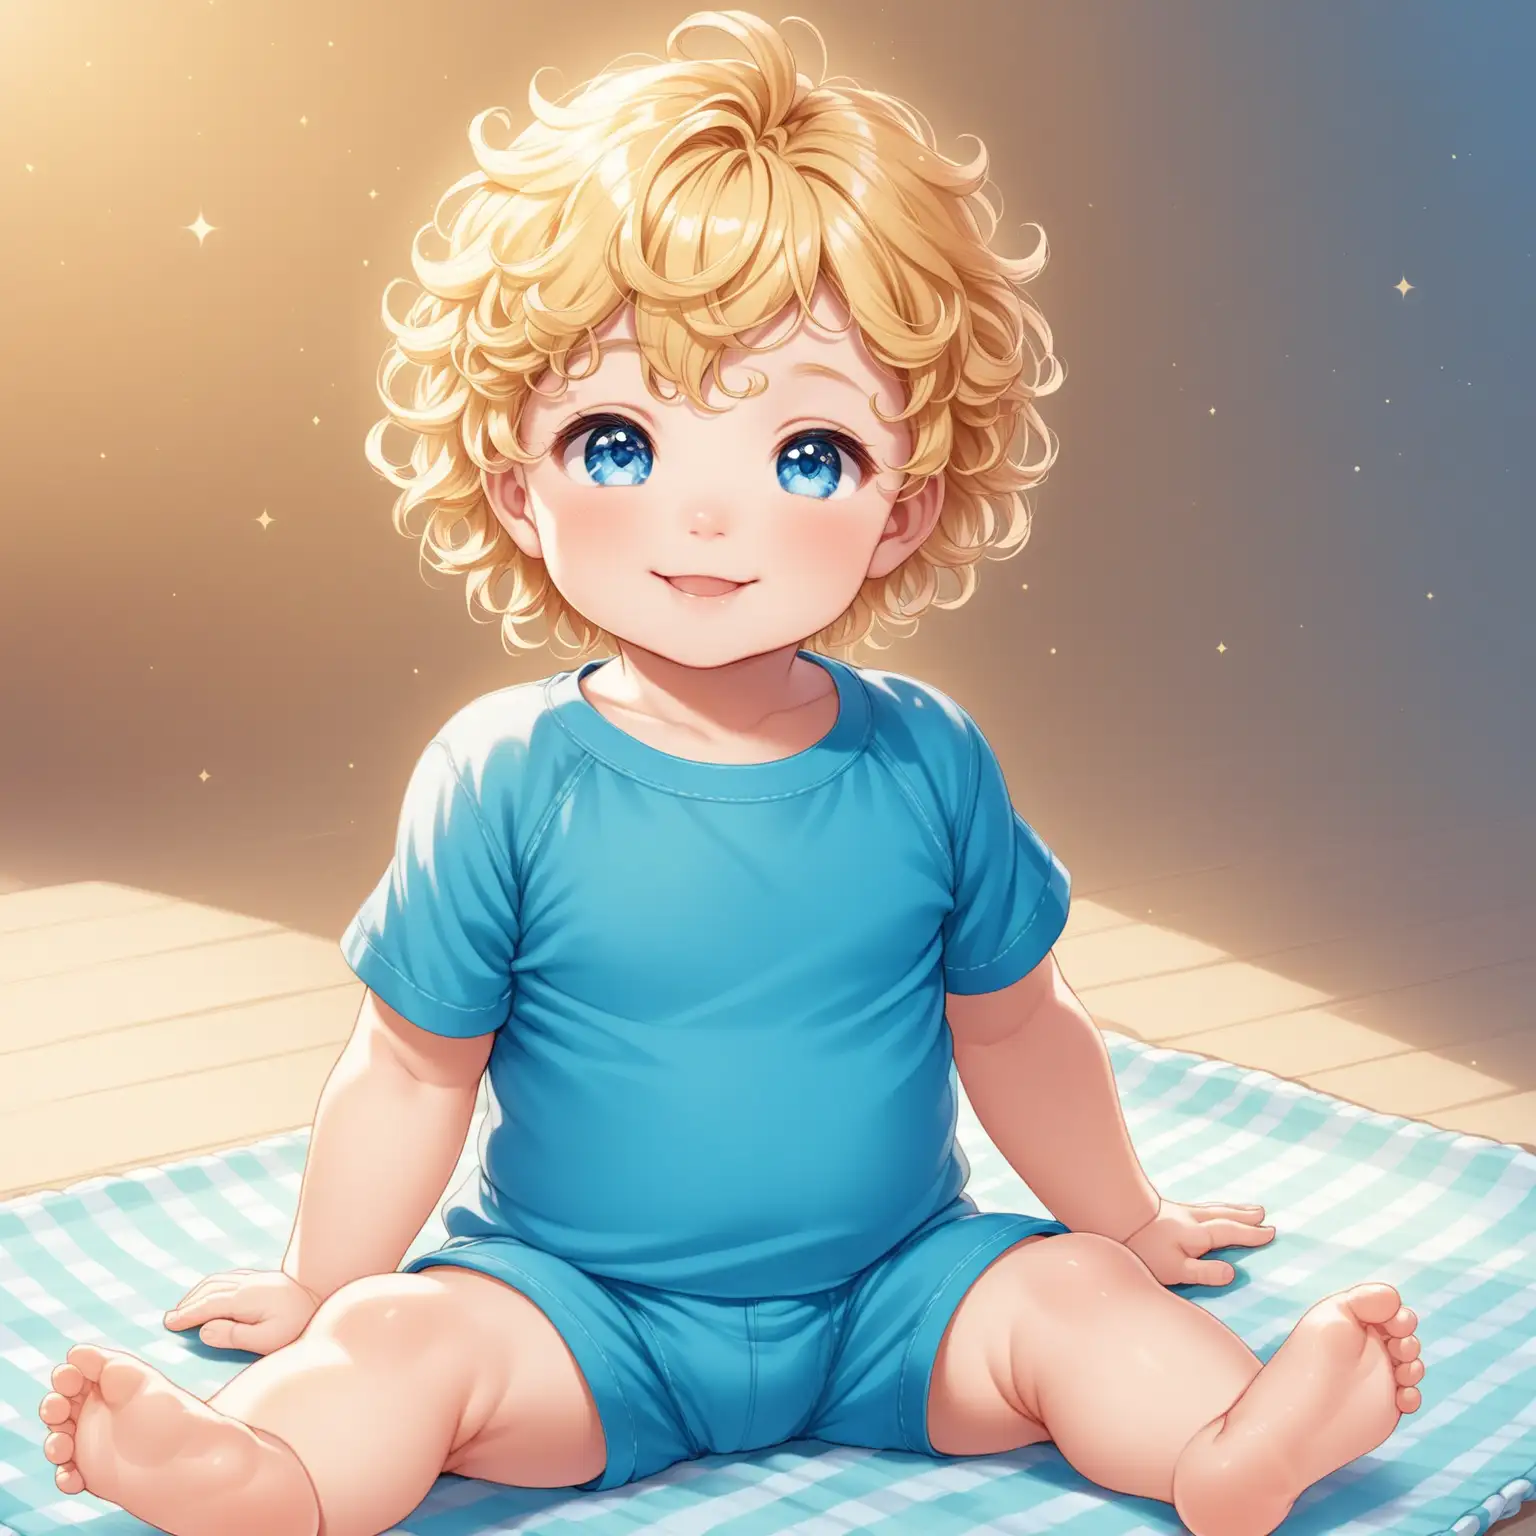 Cheerful Baby Boy with Blue Eyes and Curly Blonde Hair Sitting on a Blanket